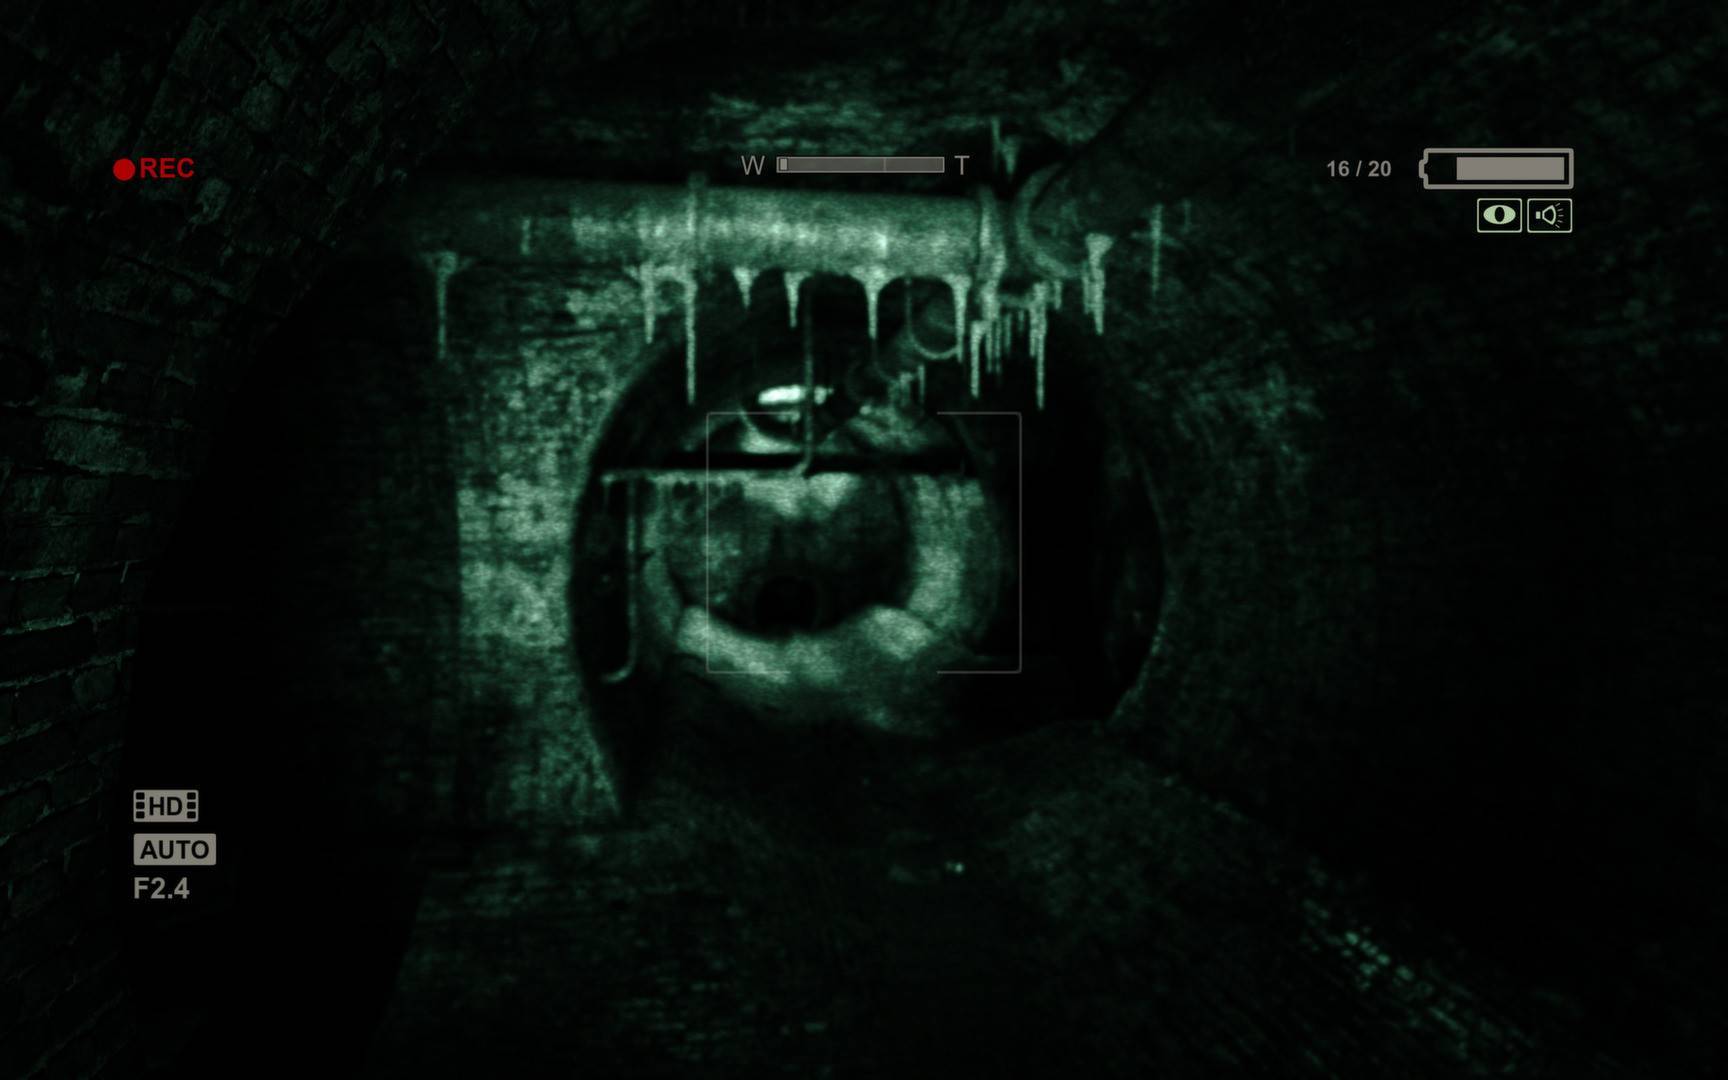 download free outlast xbox one